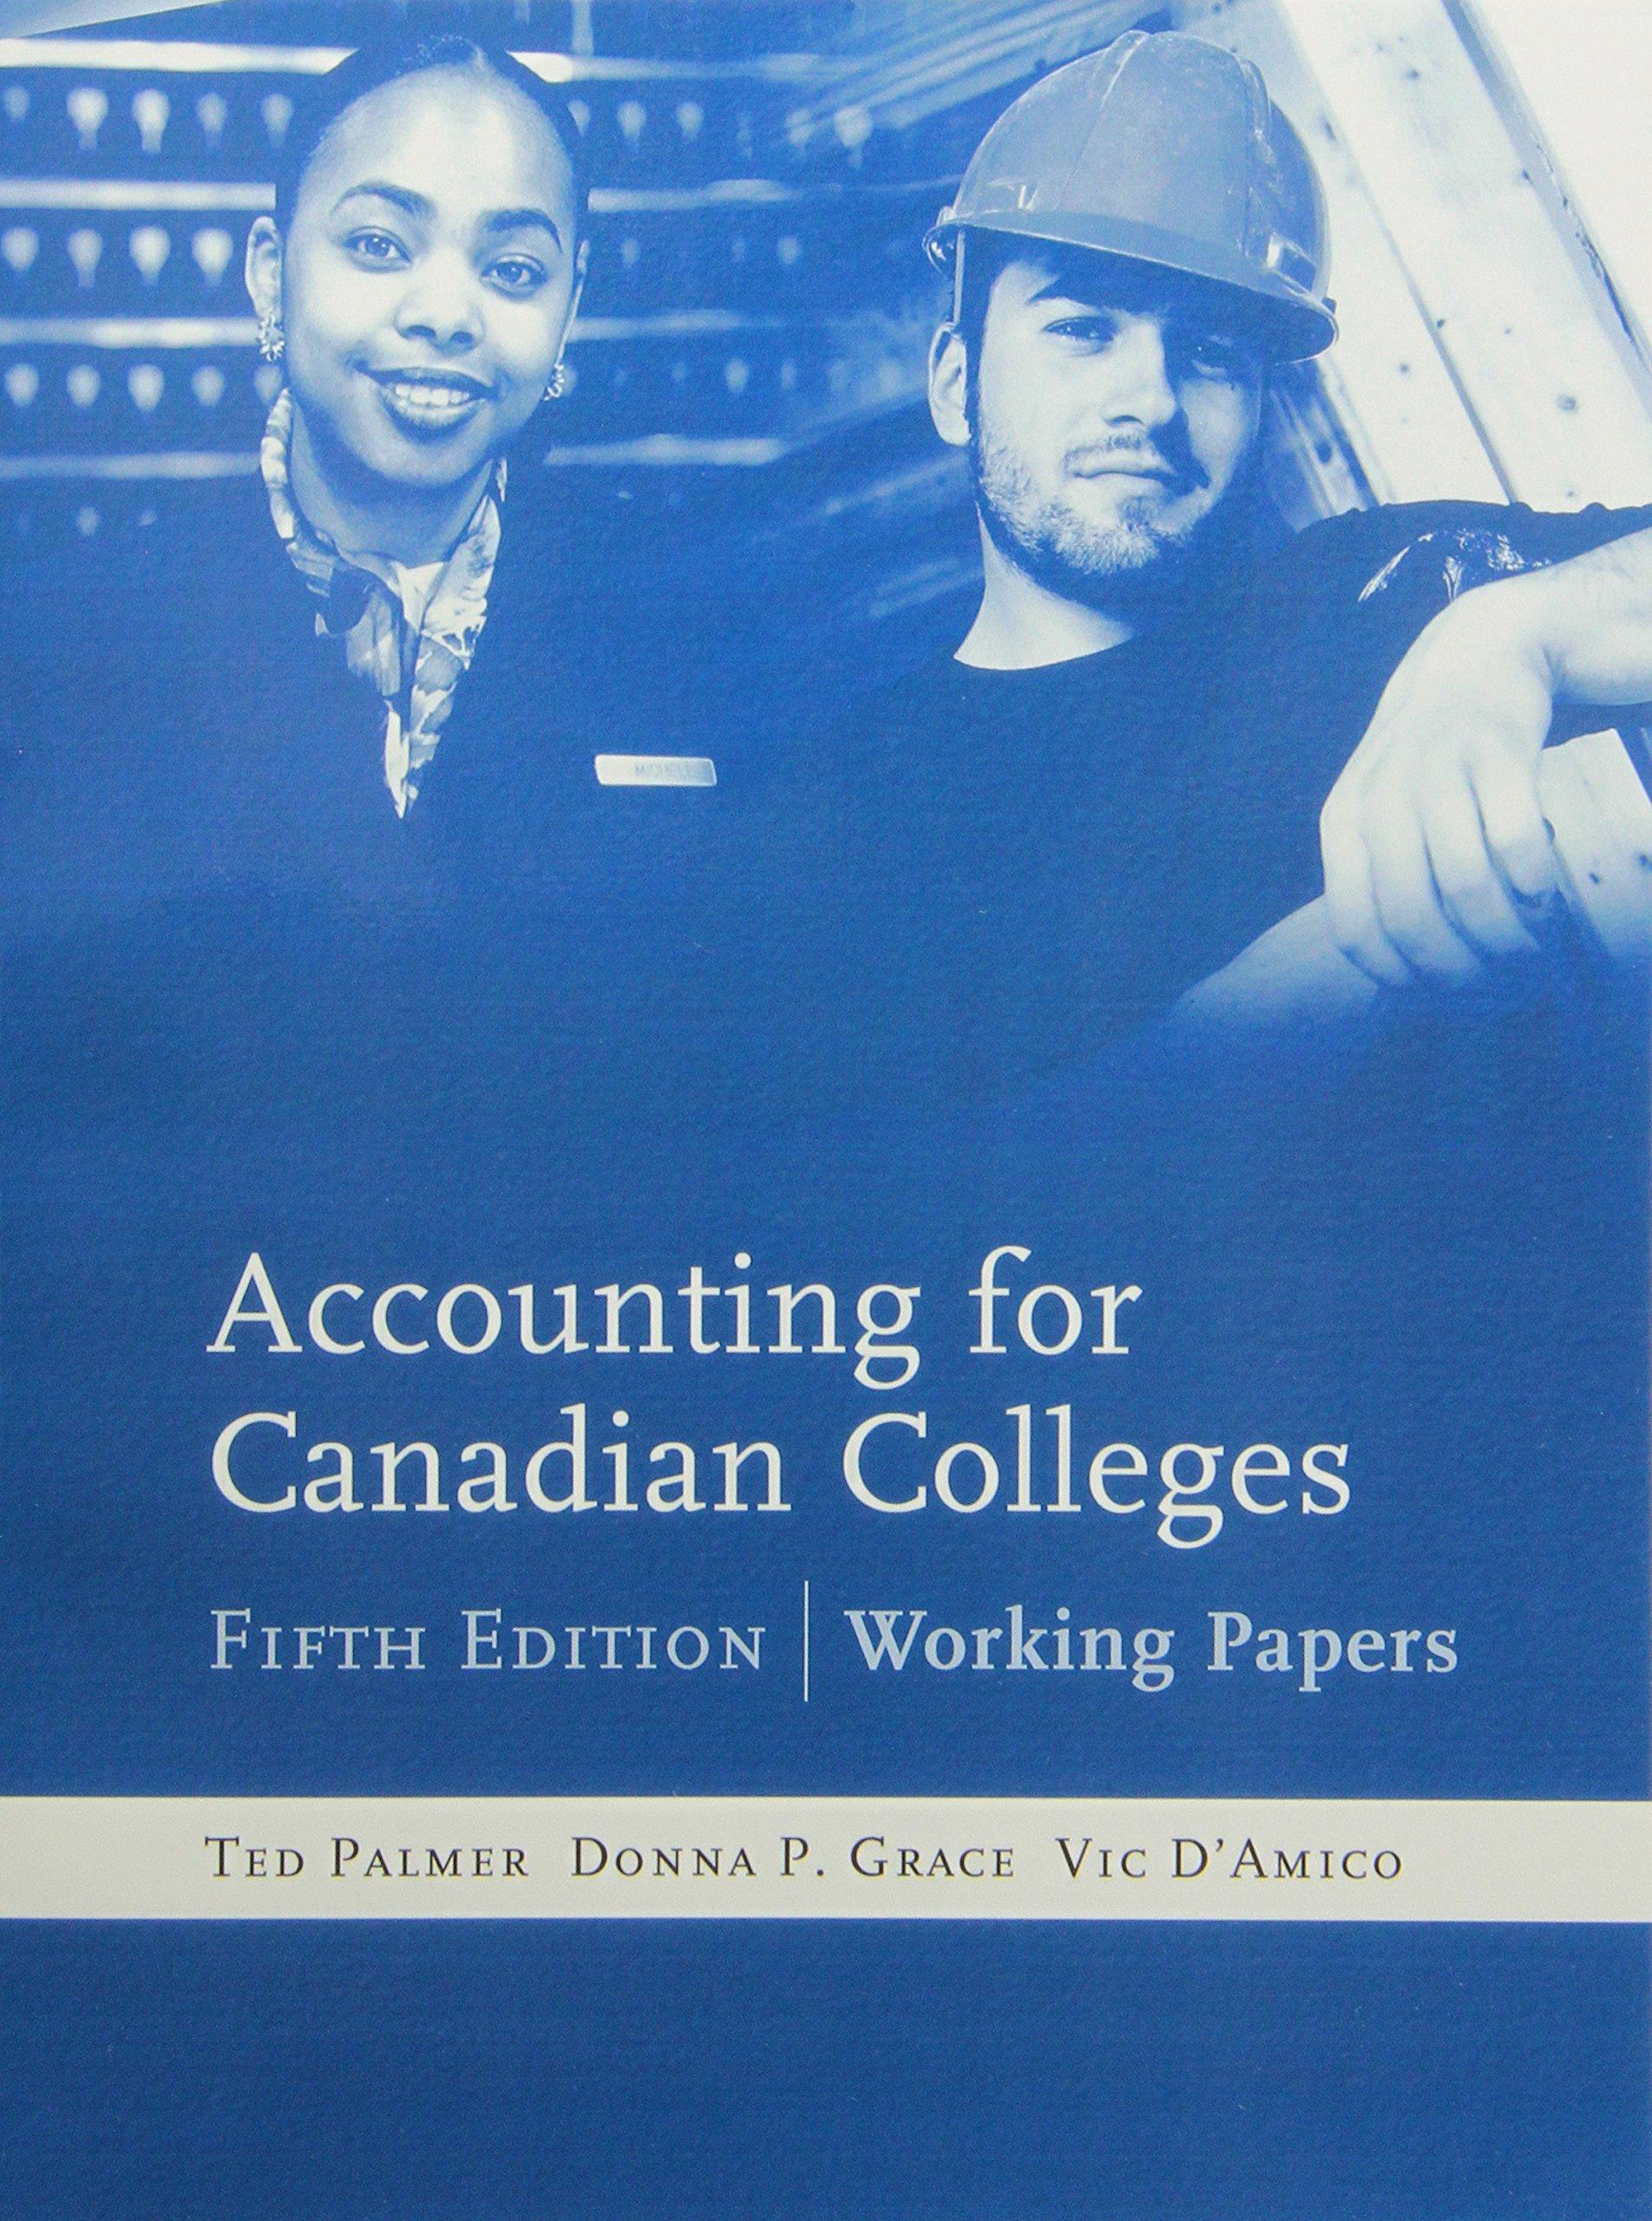 student working papers accounting for canadian colleges 5th edition ted palmer, donna grace, vic d'amico